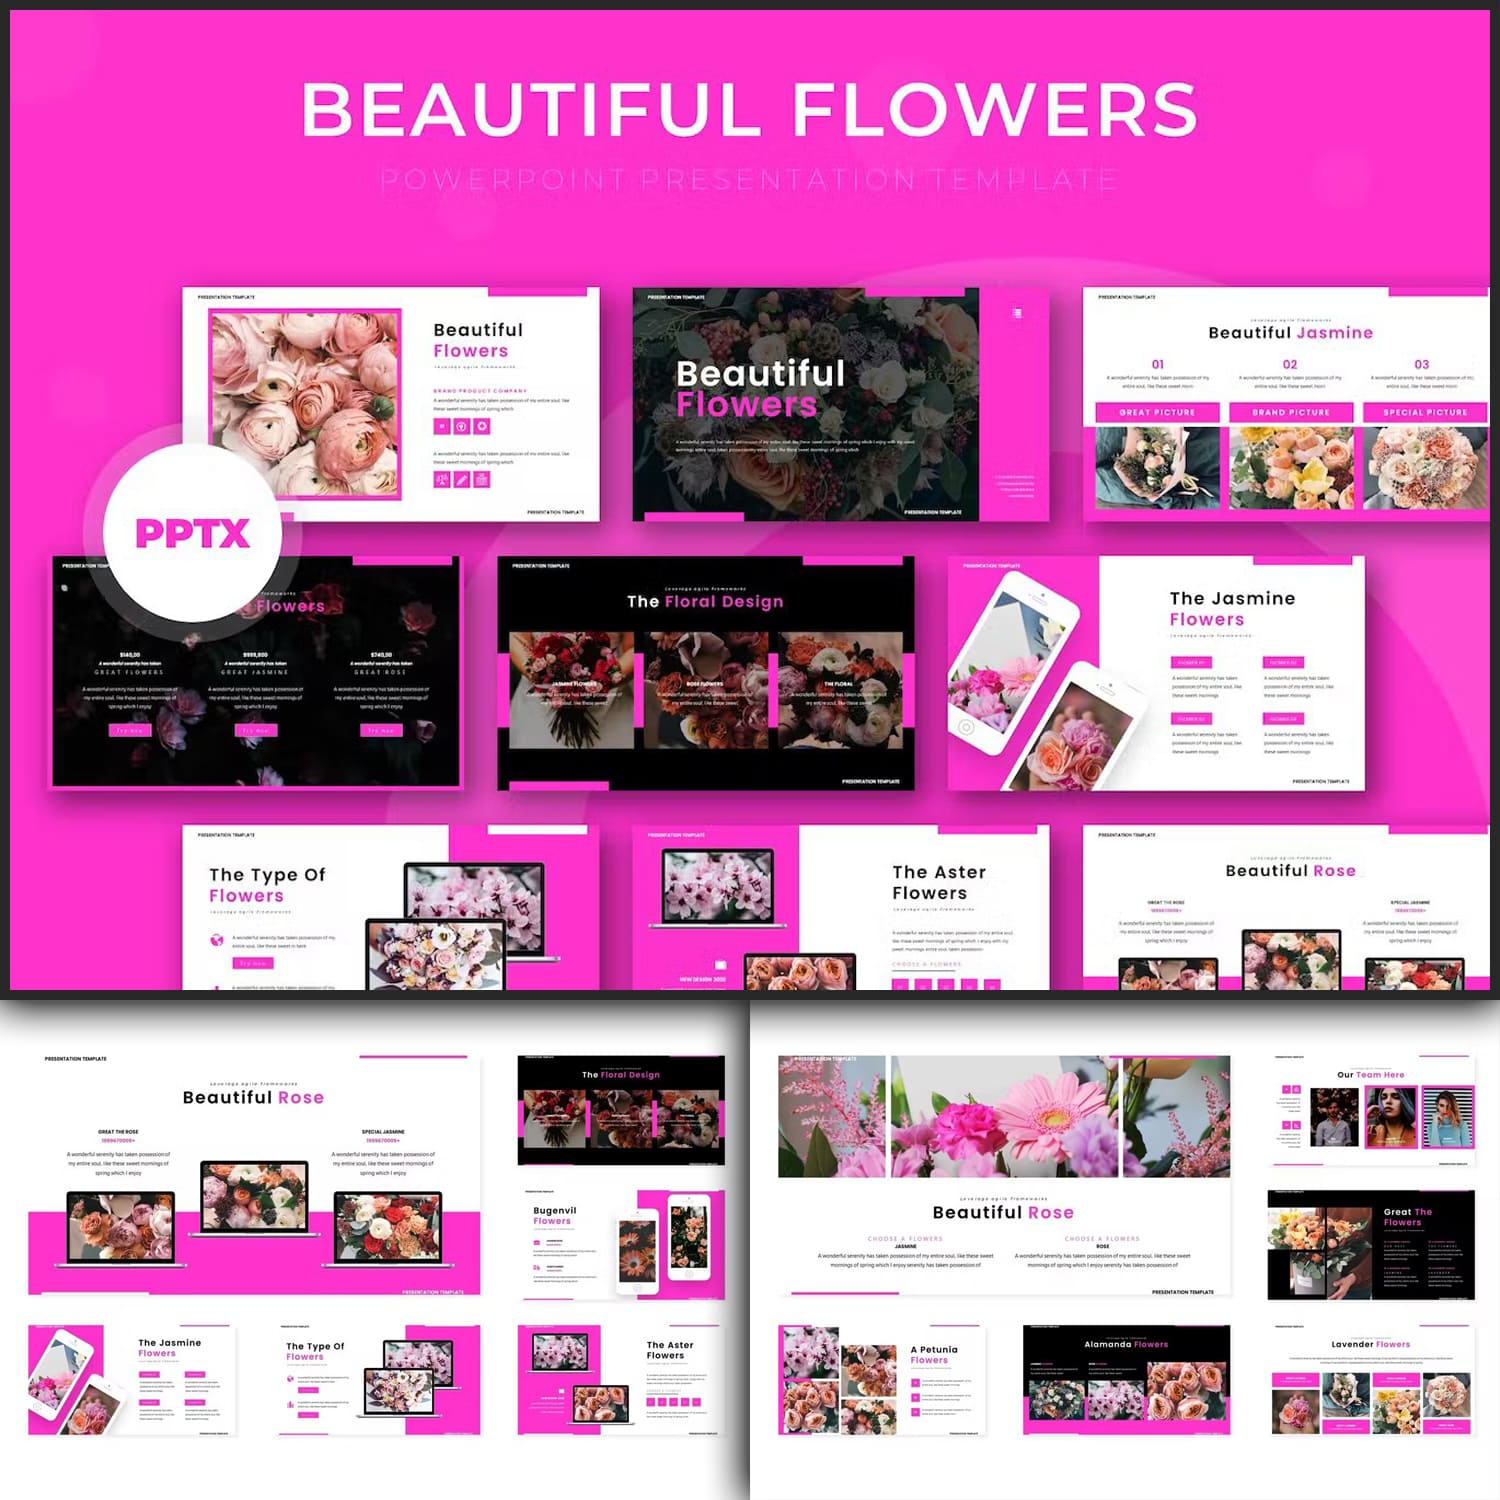 Beautiful Flowers Powerpoint Template - main image preview.